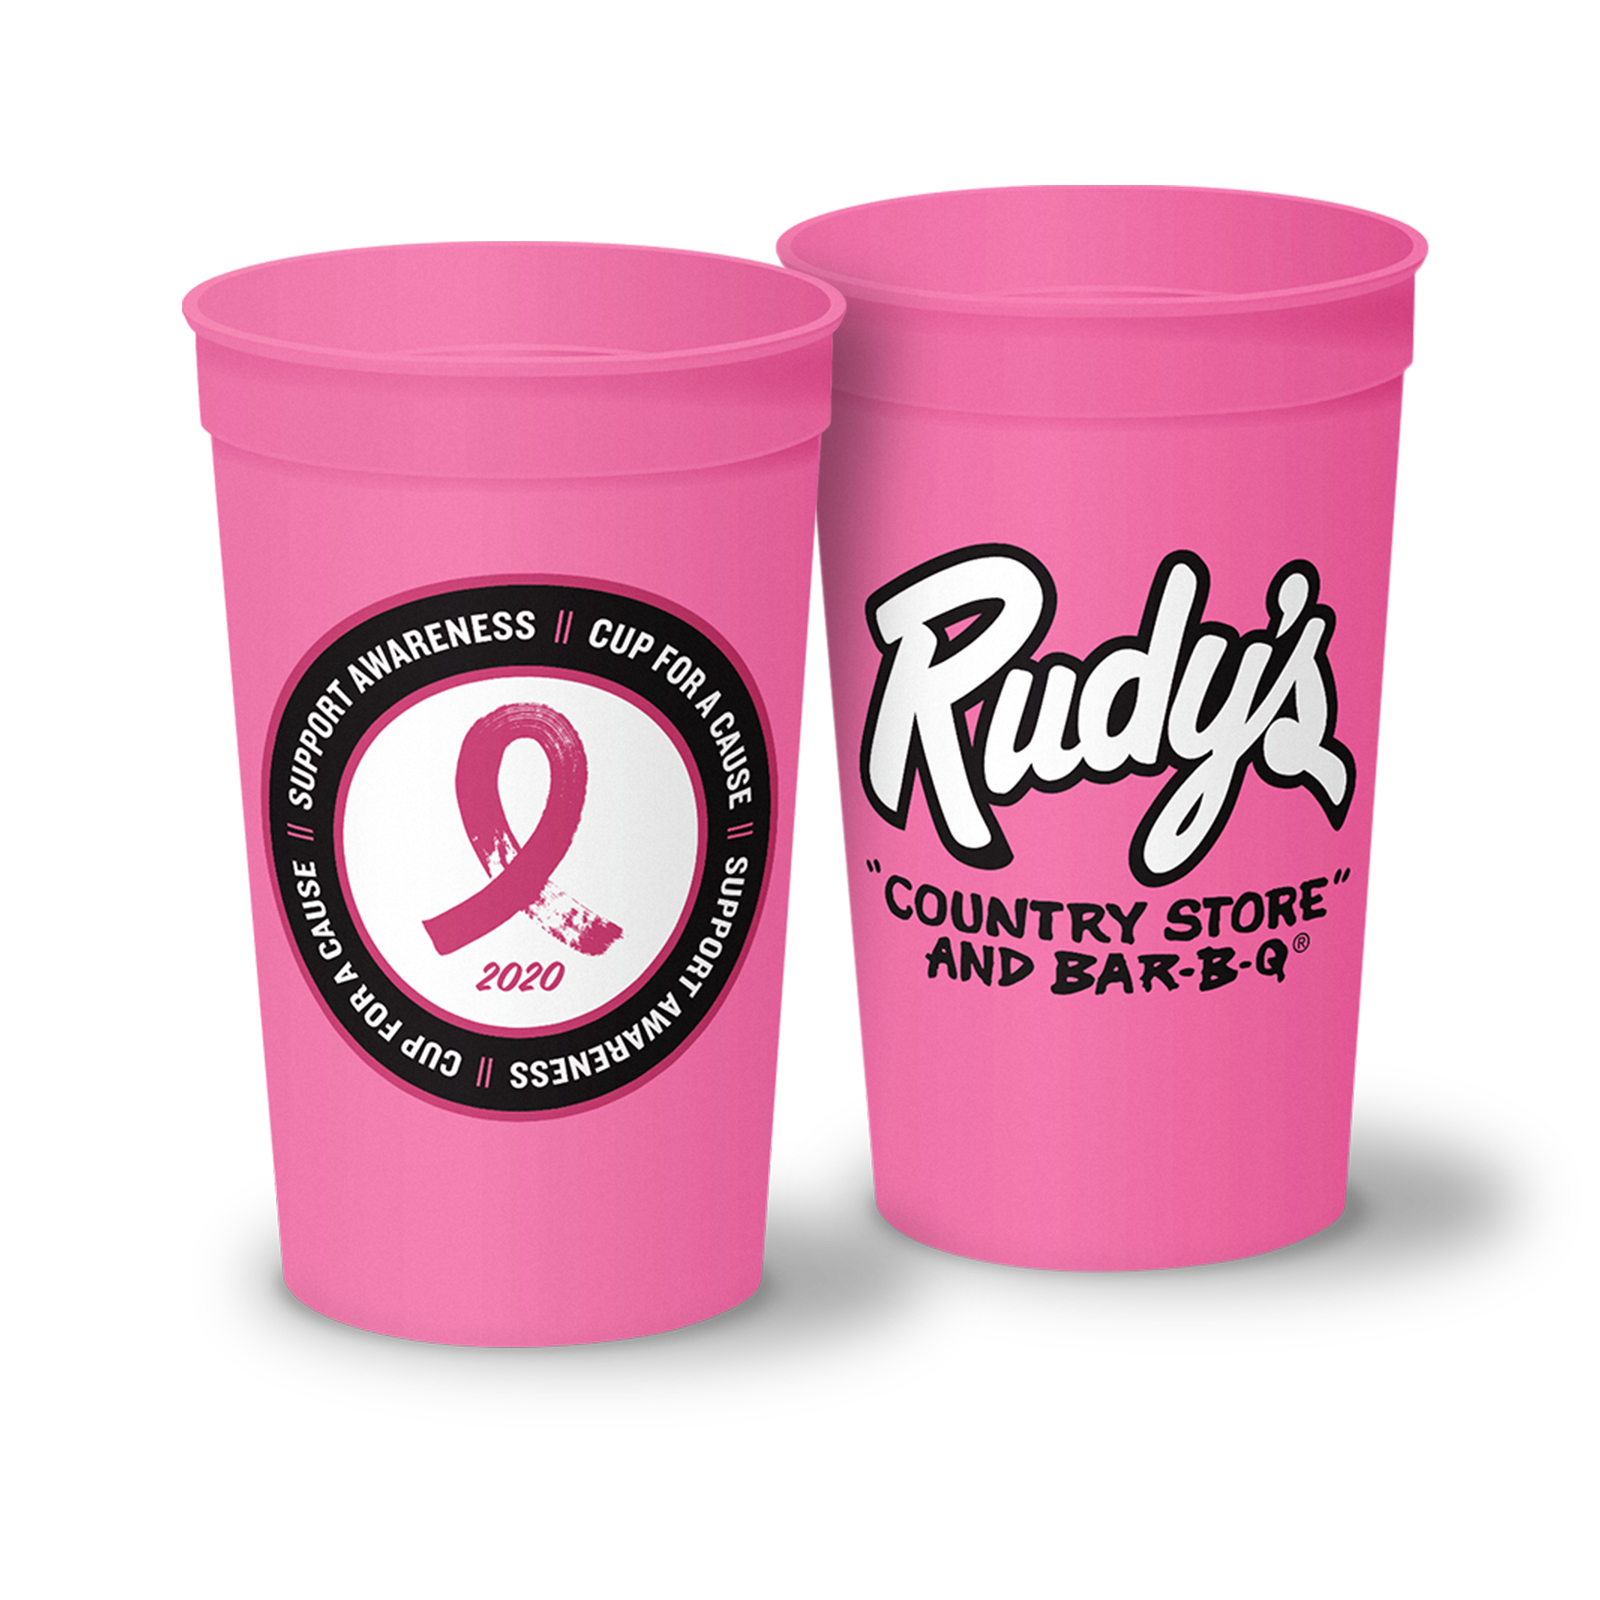 Pink Cup for a Cause